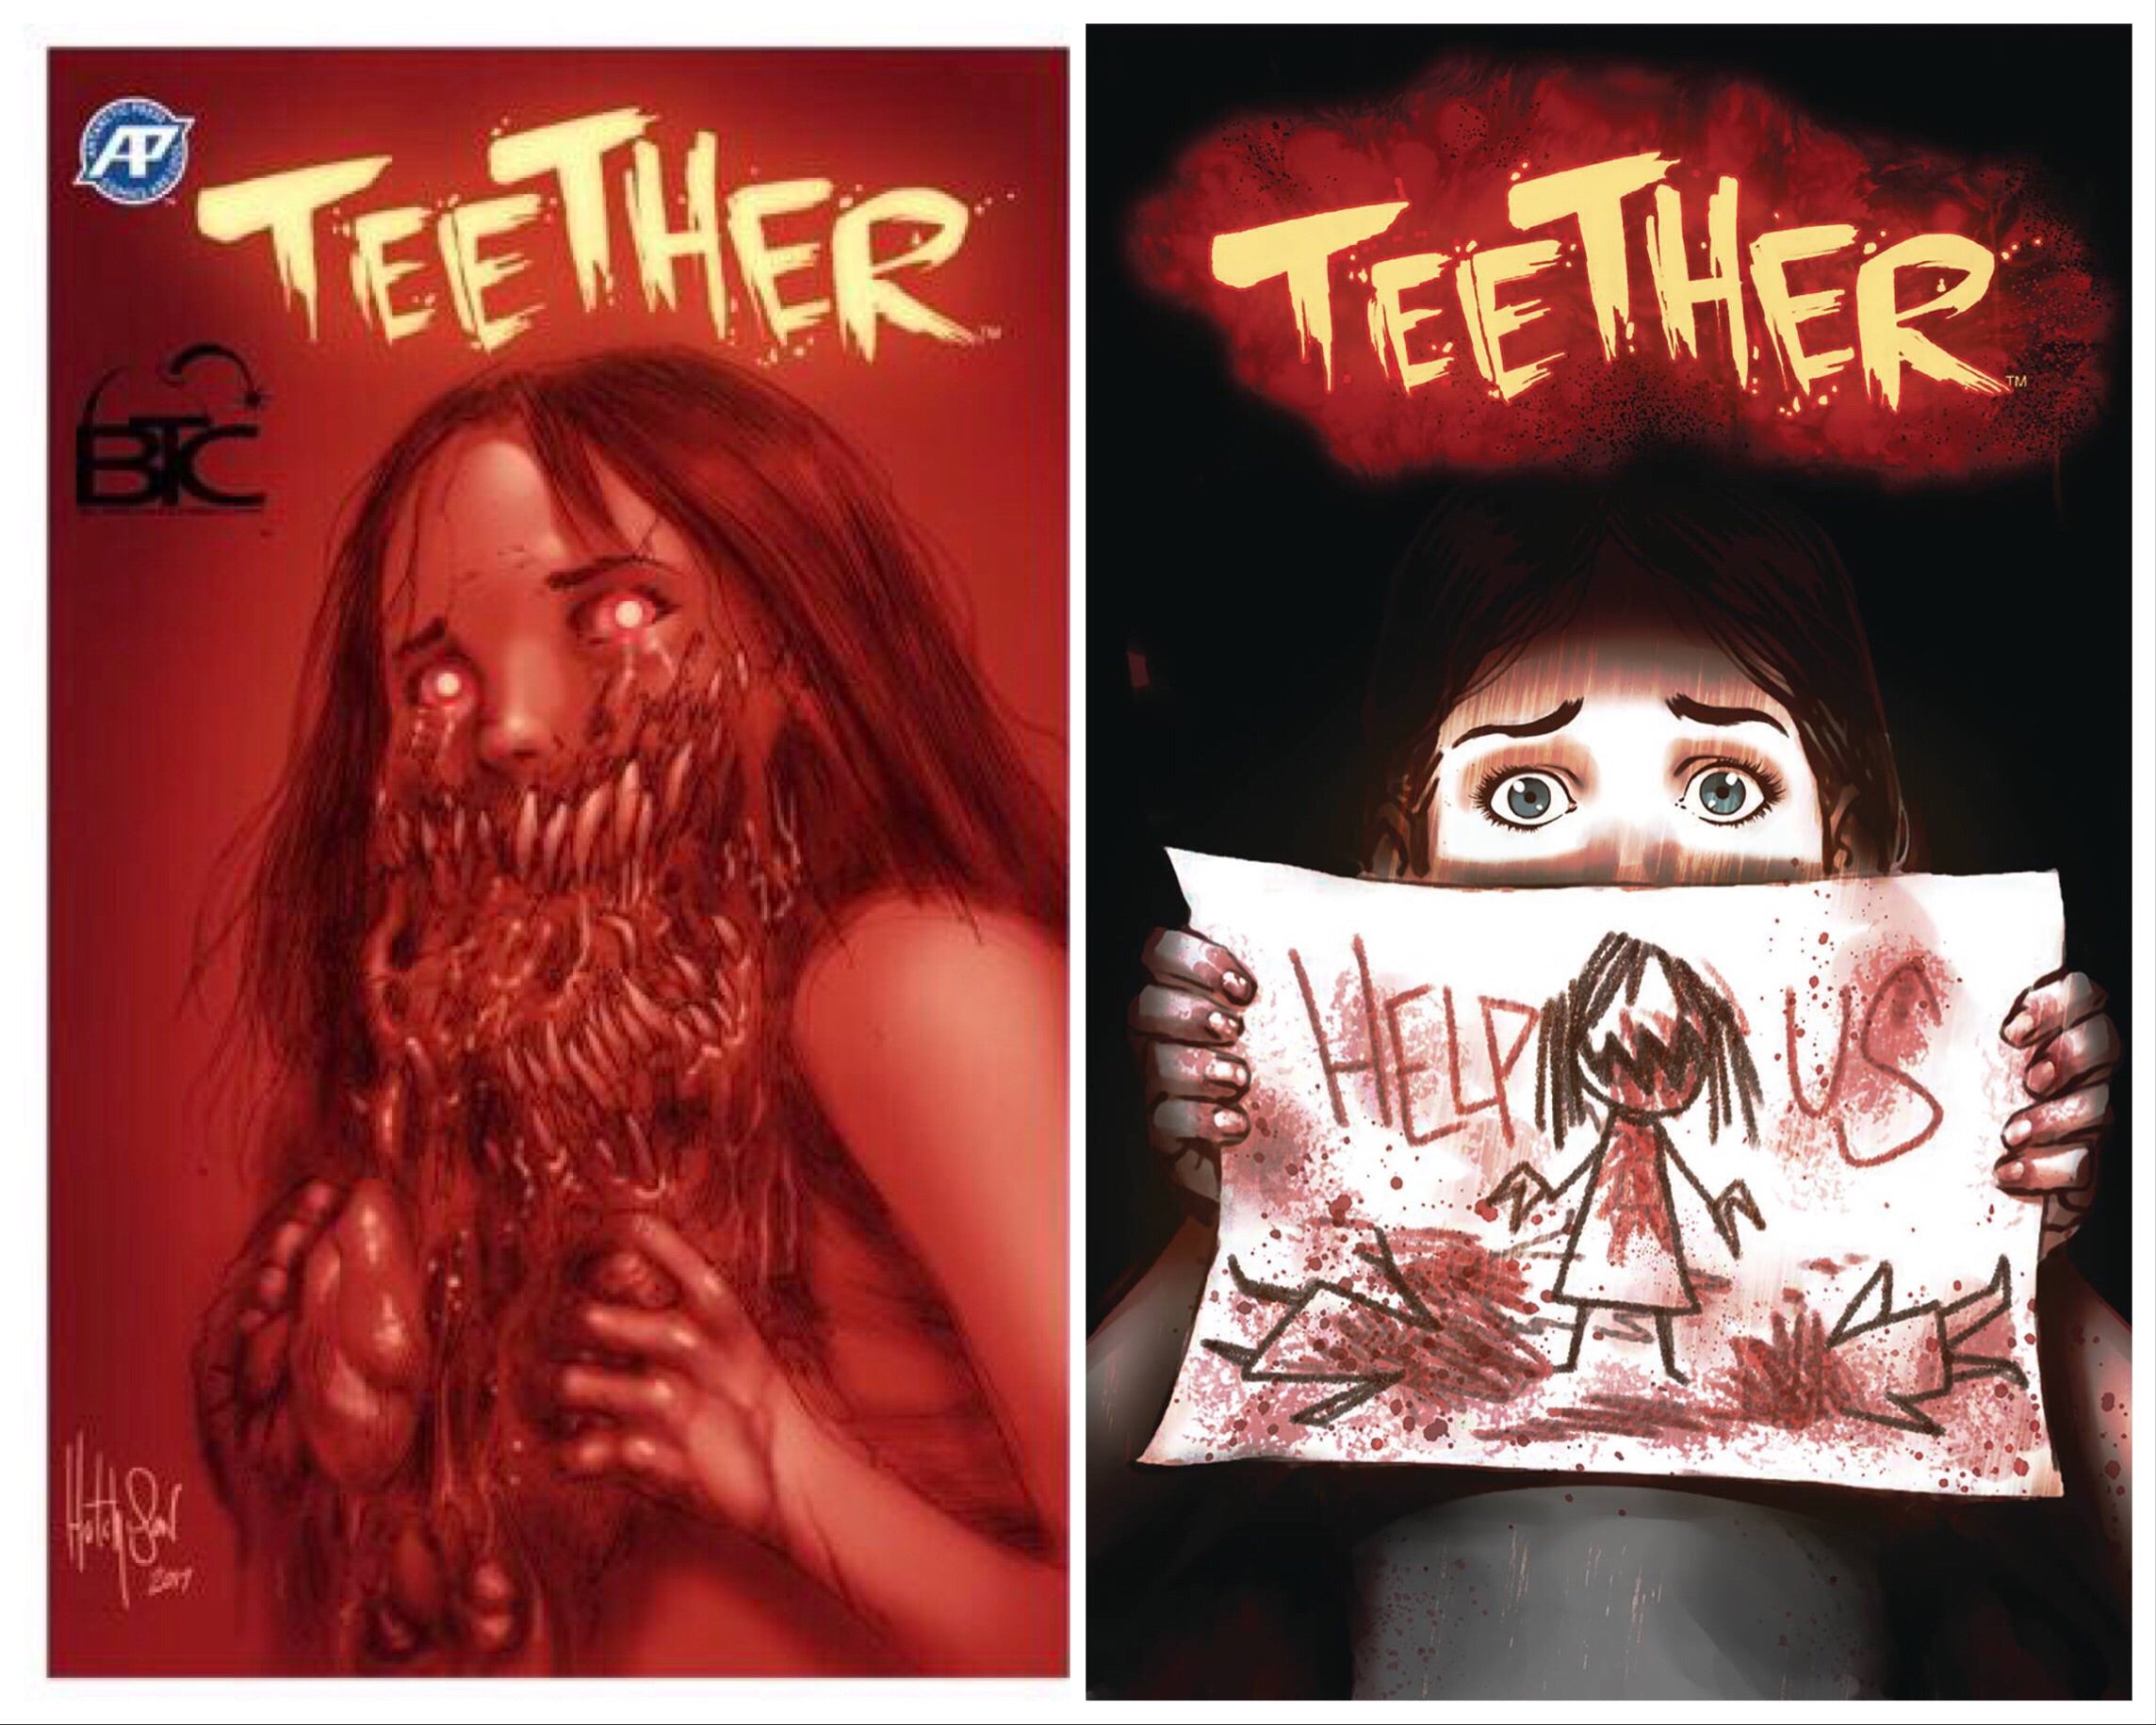 TEETHER #1 BTC EXCLUSIVE LTD TO 300 COPIES & #2 REGULAR COVER COMBO PACK